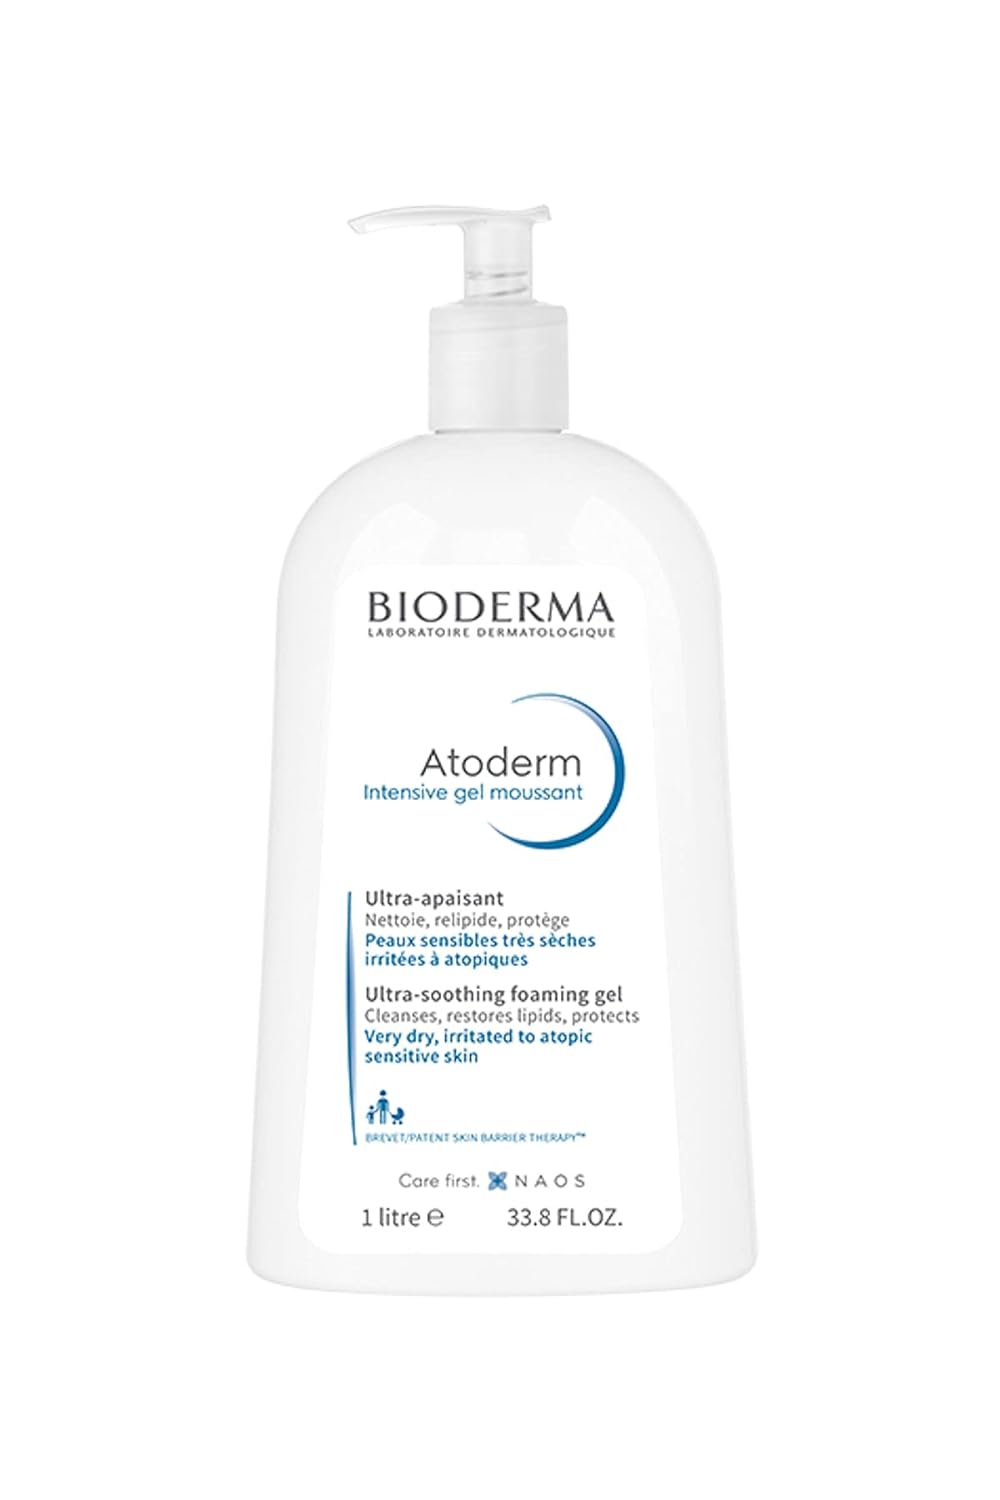 Bioderma Atoderm Intensive Ultra Rich Foaming Gel for Very Dry to Atopic Sensitive Skin